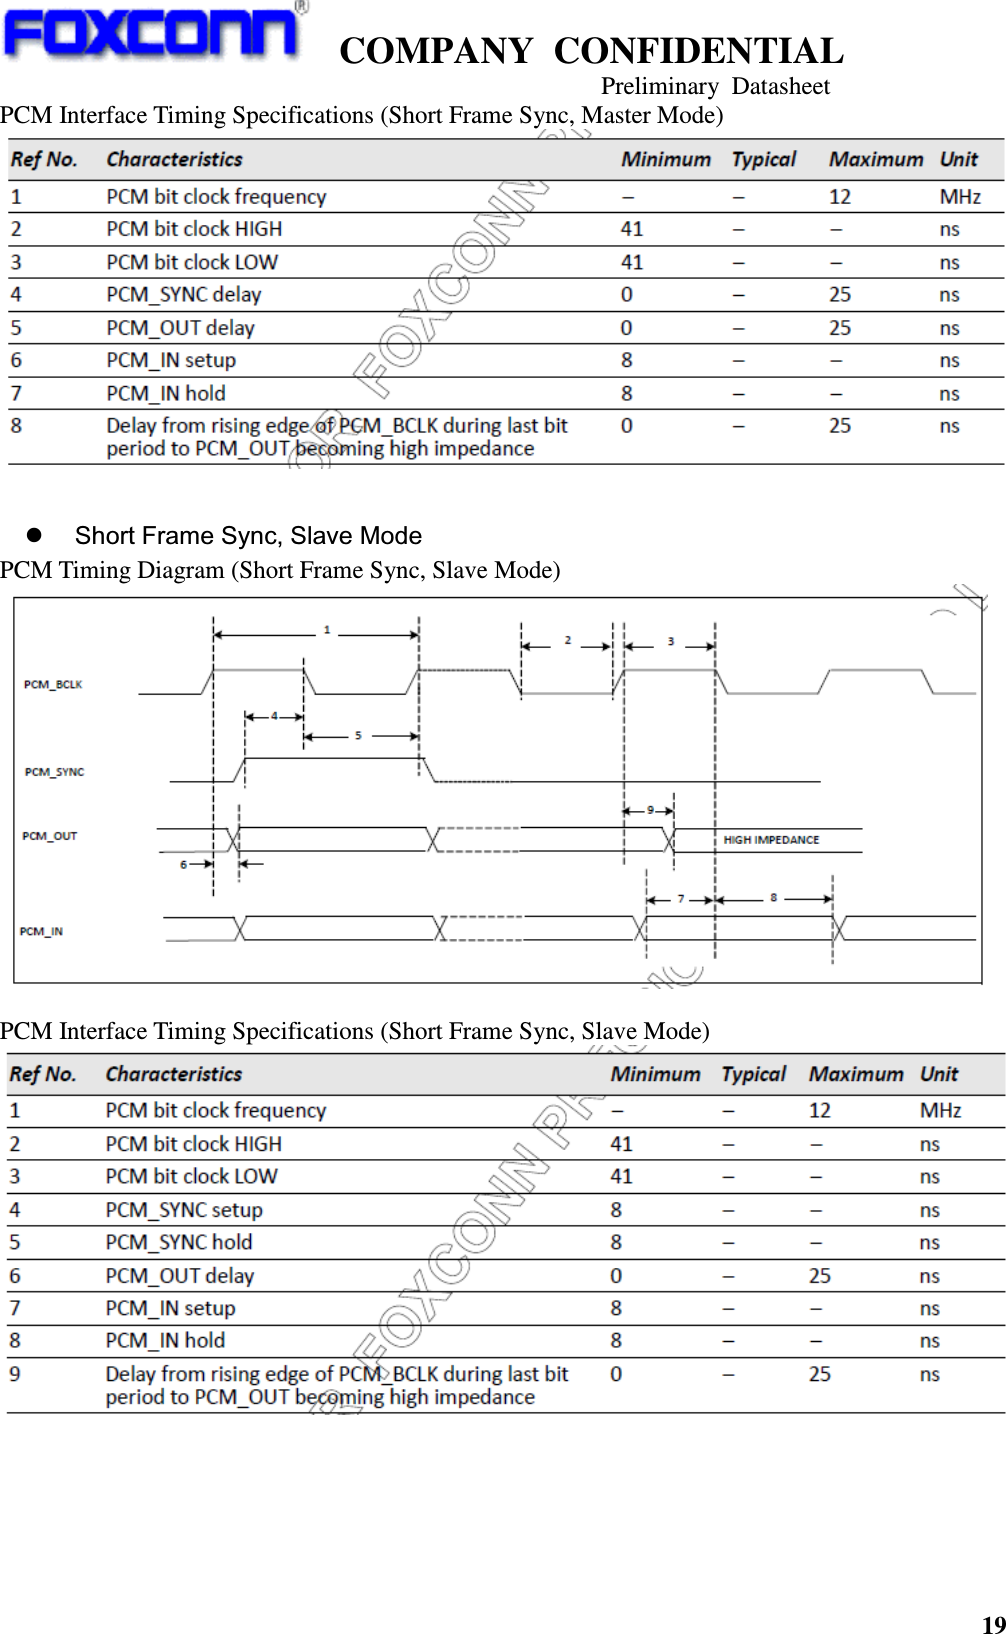    COMPANY  CONFIDENTIAL                                                                     Preliminary  Datasheet 19  PCM Interface Timing Specifications (Short Frame Sync, Master Mode)    Short Frame Sync, Slave Mode PCM Timing Diagram (Short Frame Sync, Slave Mode)                                                       PCM Interface Timing Specifications (Short Frame Sync, Slave Mode)      